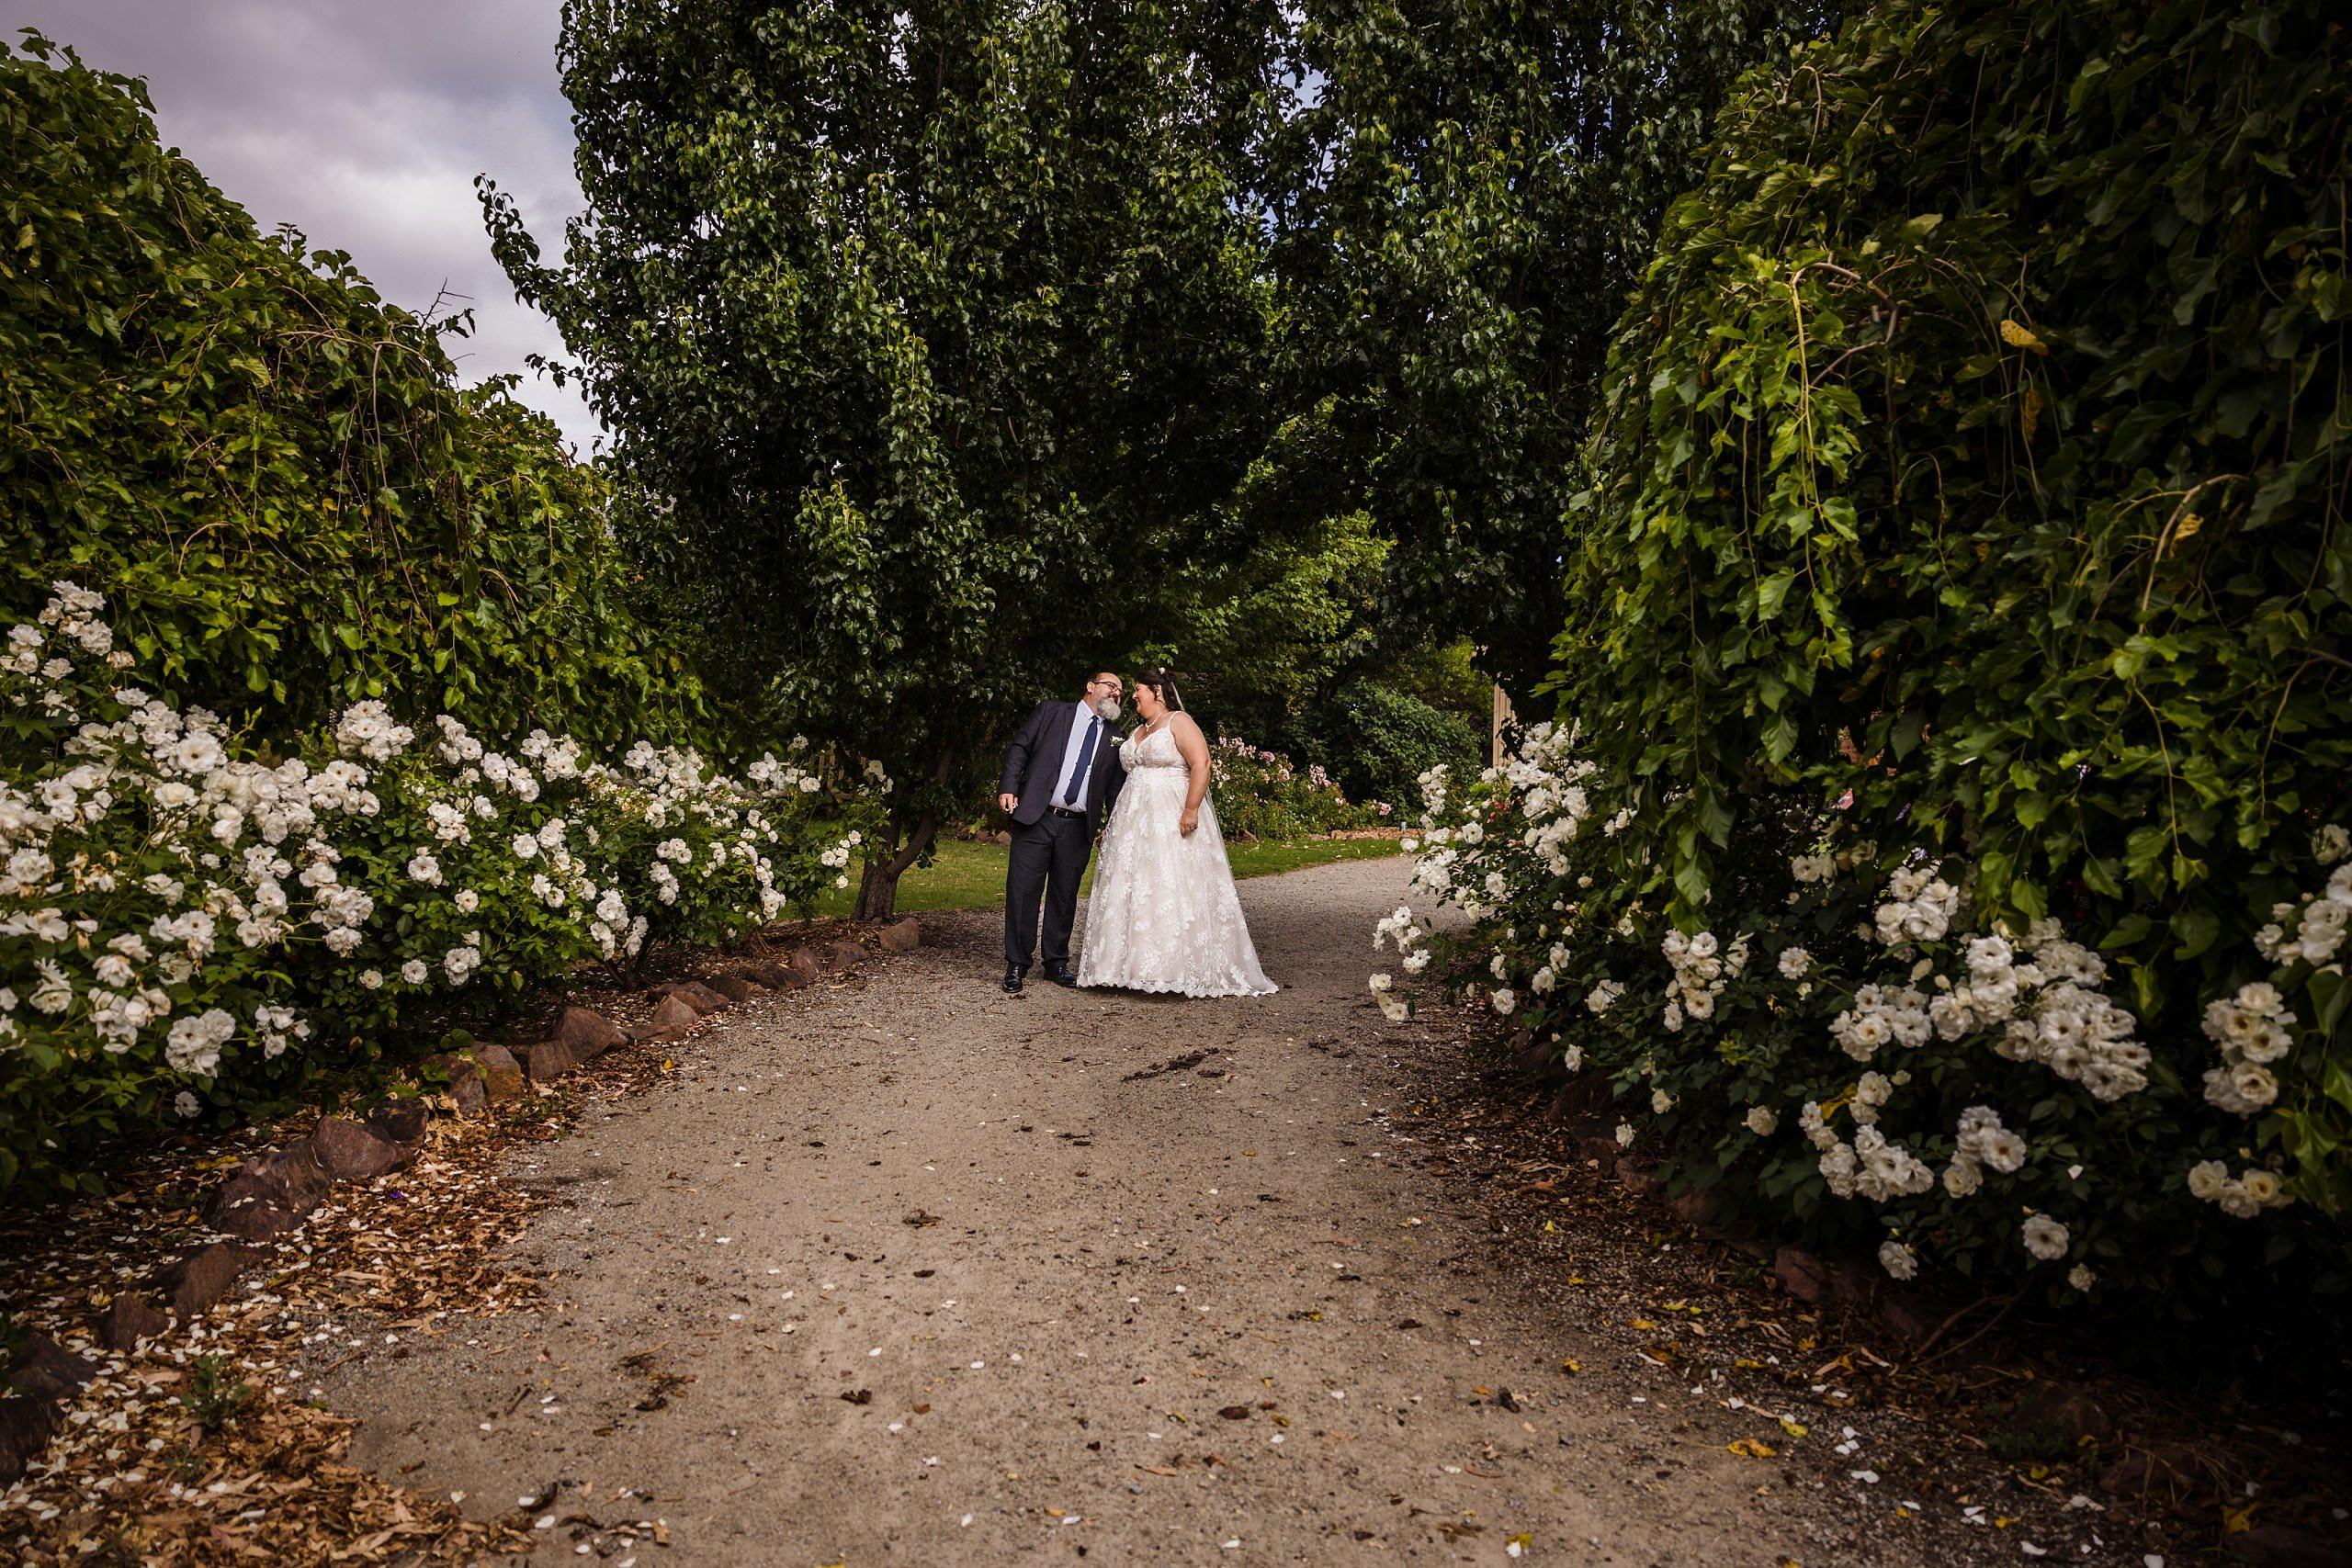 The Bride and Groom holding hands and walking through the rose garden at the old cheese factory